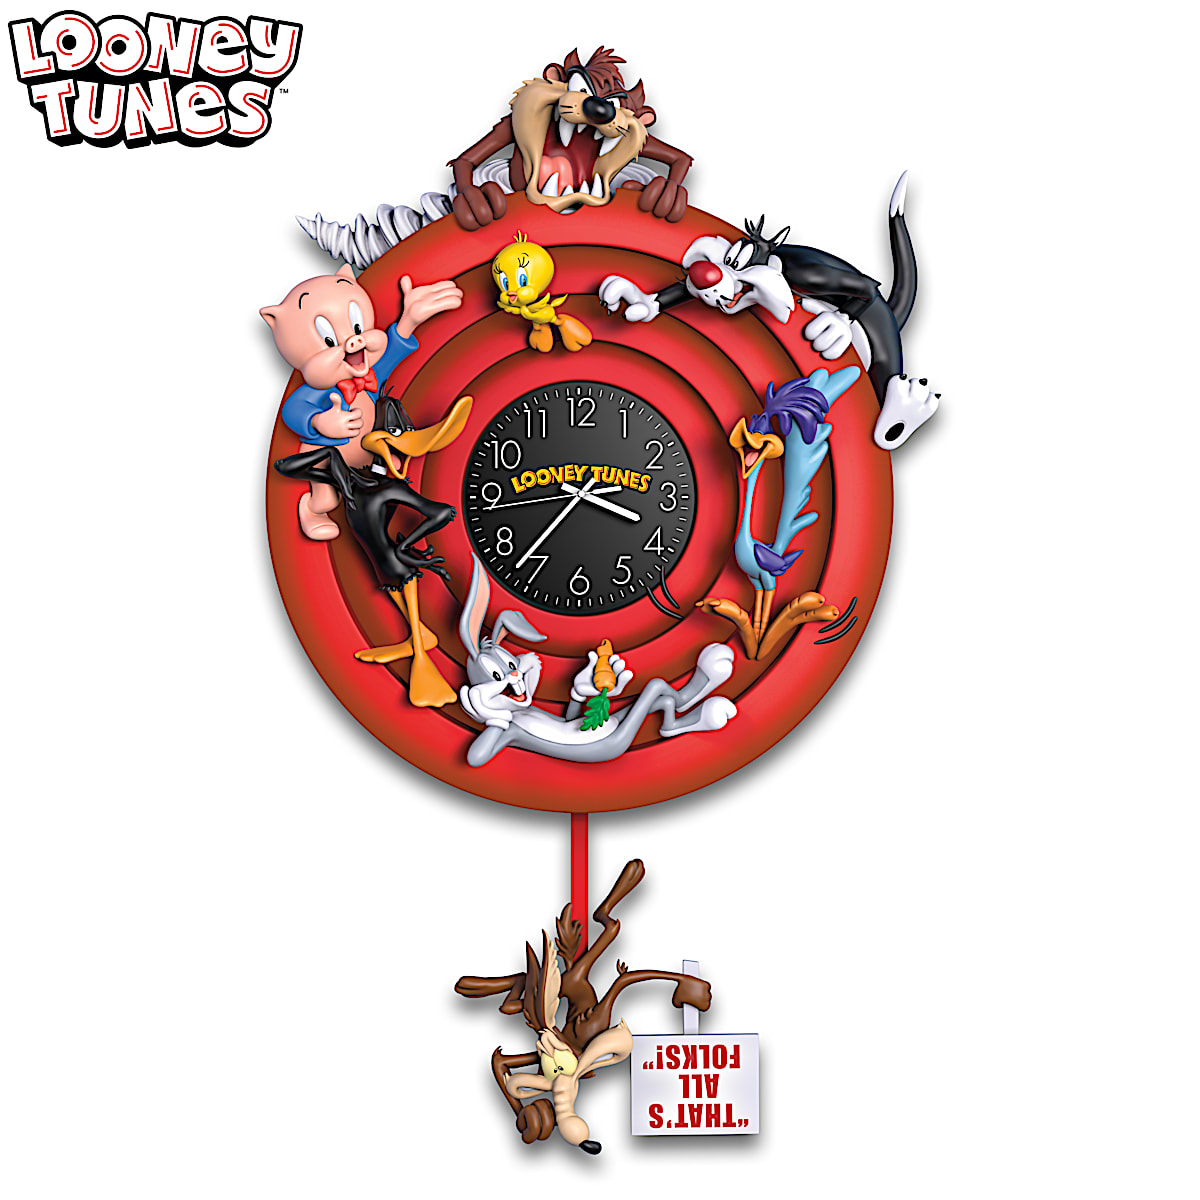 LOONEY TUNES 16 High Sculptural Wall Clock Featuring The Iconic